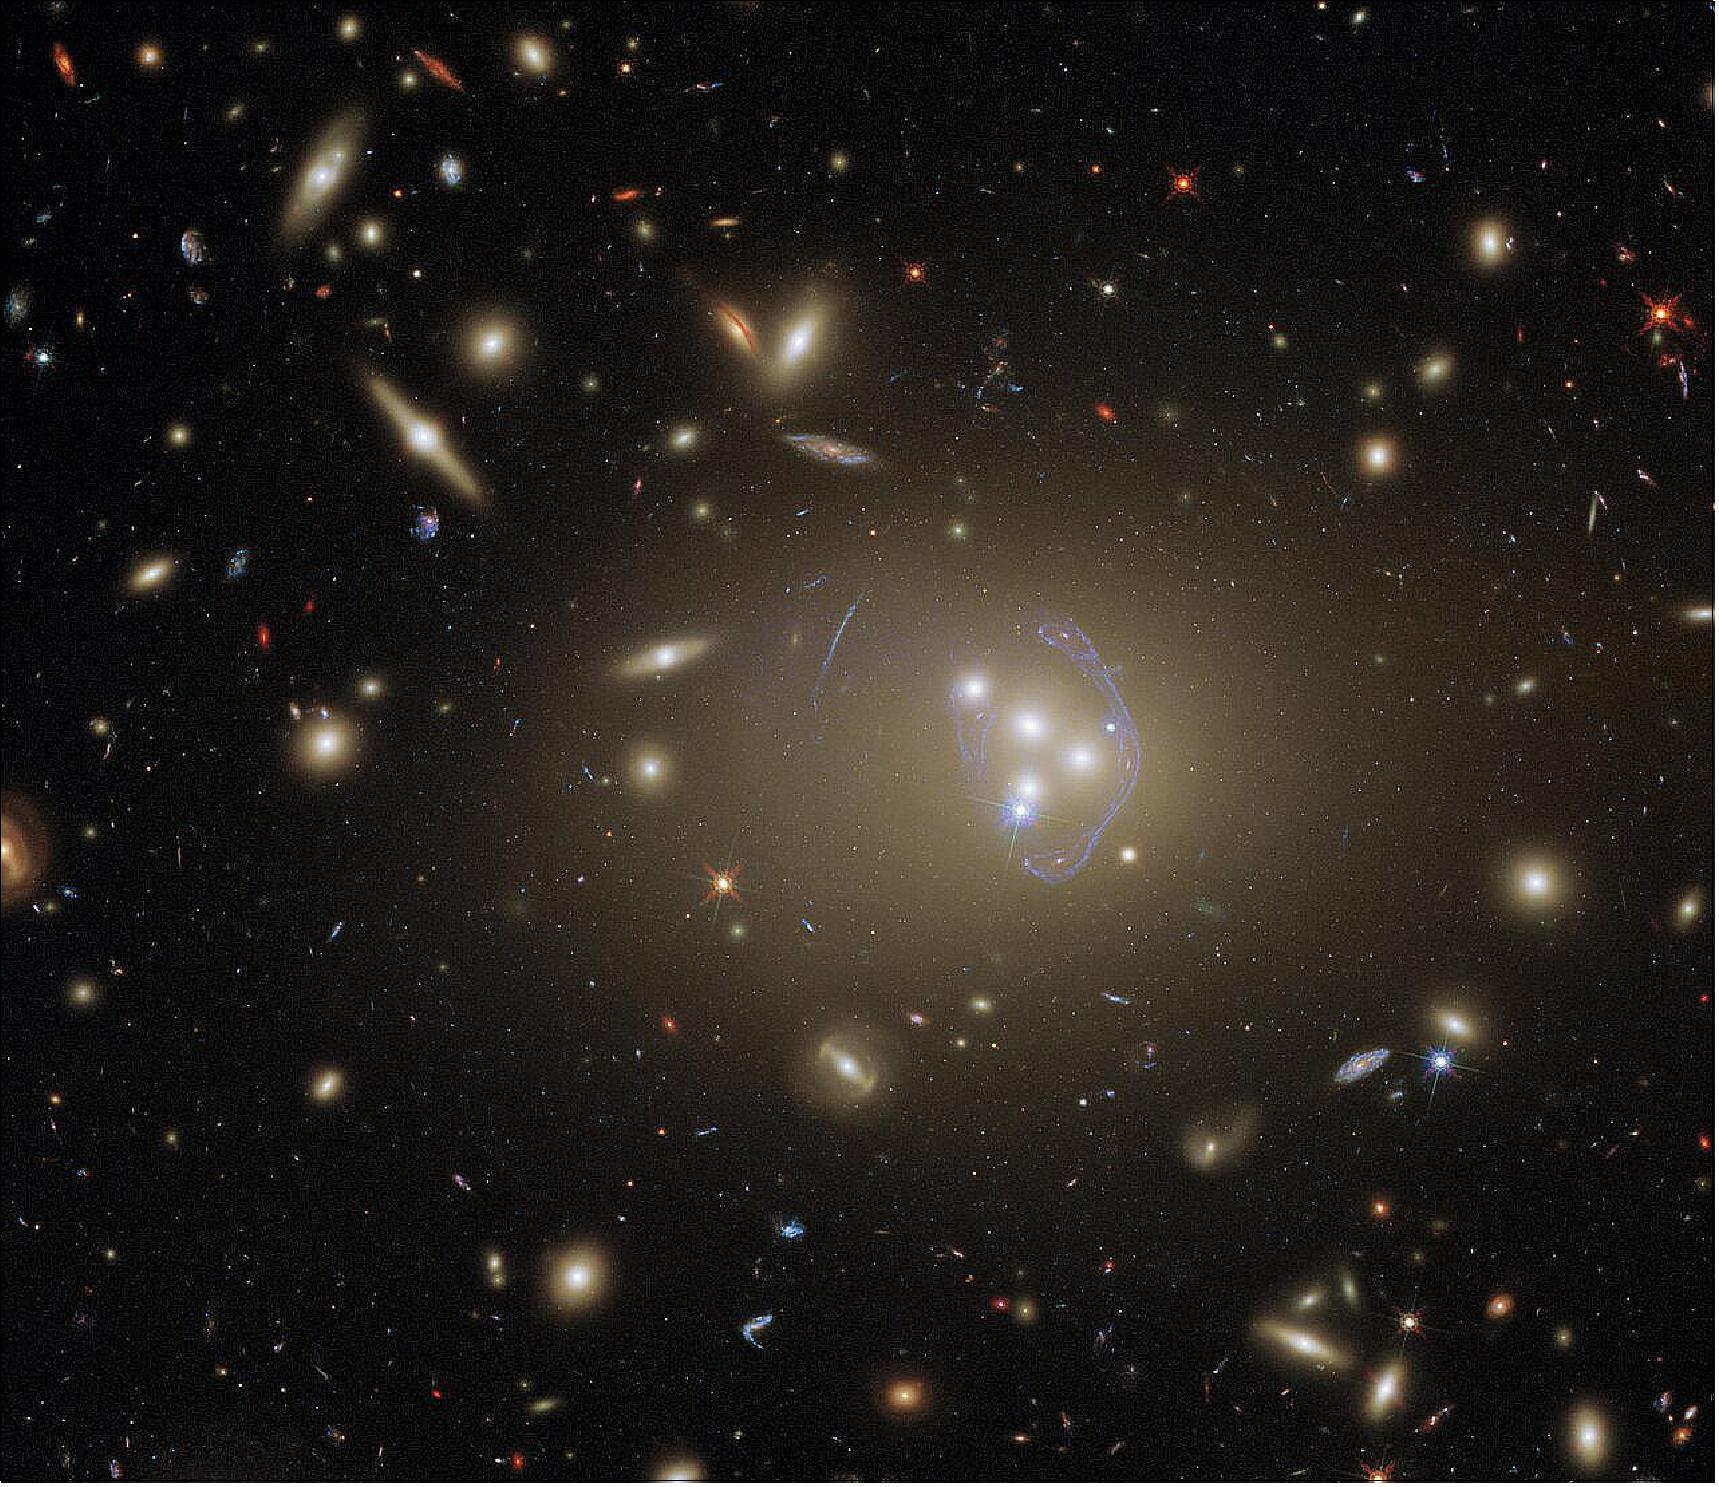 Figure 88: This detailed image features Abell 3827, a galaxy cluster that offers a wealth of exciting possibilities for study. It was observed by Hubble in order to study dark matter, which is one of the greatest puzzles cosmologists face today. The science team used Hubble’s Advanced Camera for Surveys (ACS) and Wide Field Camera 3 (WFC3) to complete their observations. The two cameras have different specifications and can observe different parts of the electromagnetic spectrum, so using them both allowed the astronomers to collect more complete information. Abell 3827 has also been observed previously by Hubble, because of the interesting gravitational lens at its core (image credit: ESA/Hubble & NASA, R. Massey, CC BY 4.0)